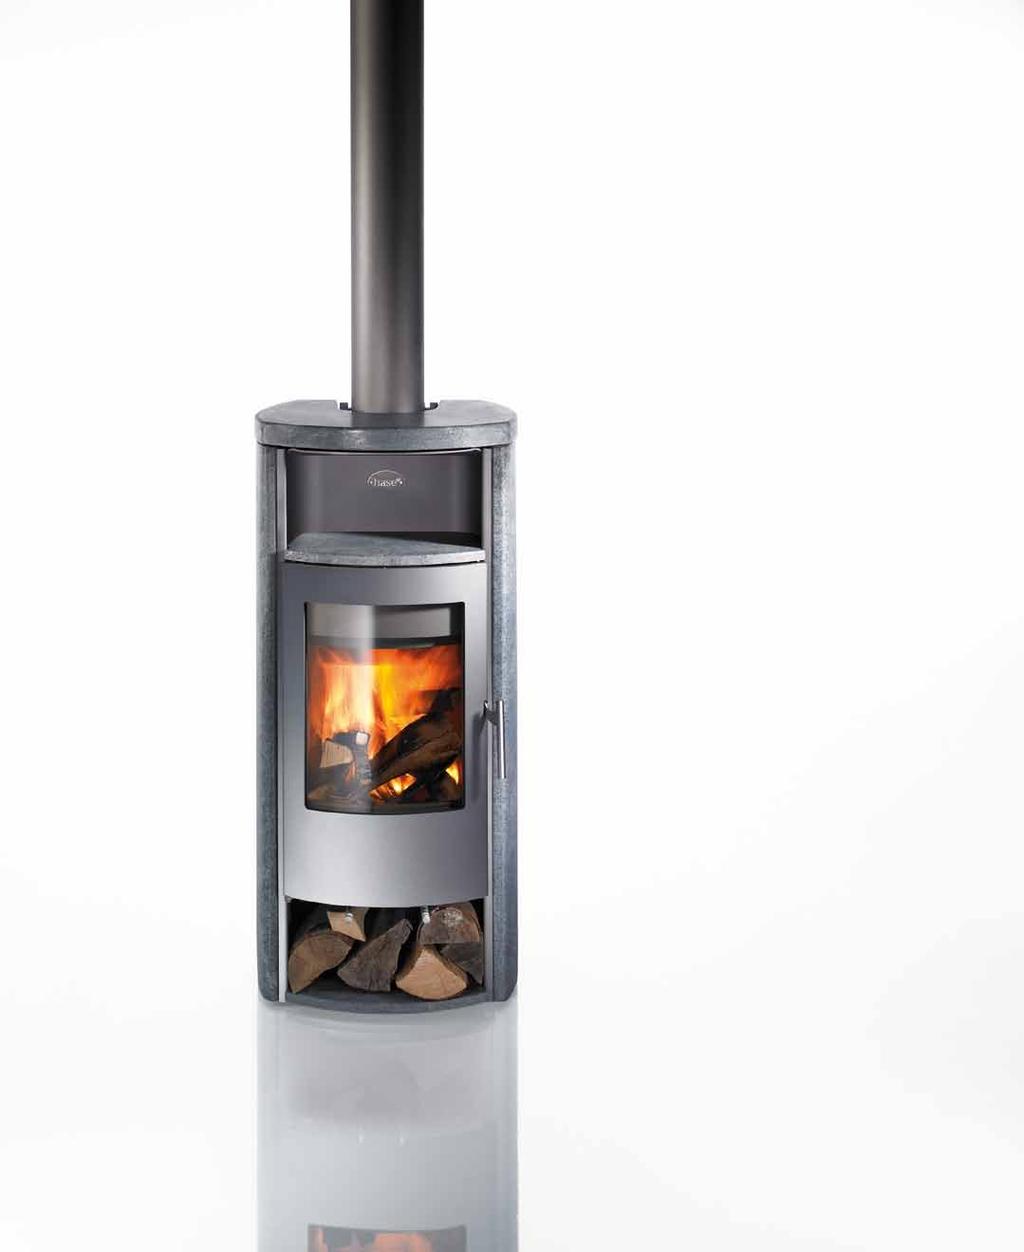 Jena The Jena stove is distinguished by its harmonious, balanced proportions and practical three-compartment design: Wood can be stored below the fire box, while the upper warming compartment keeps